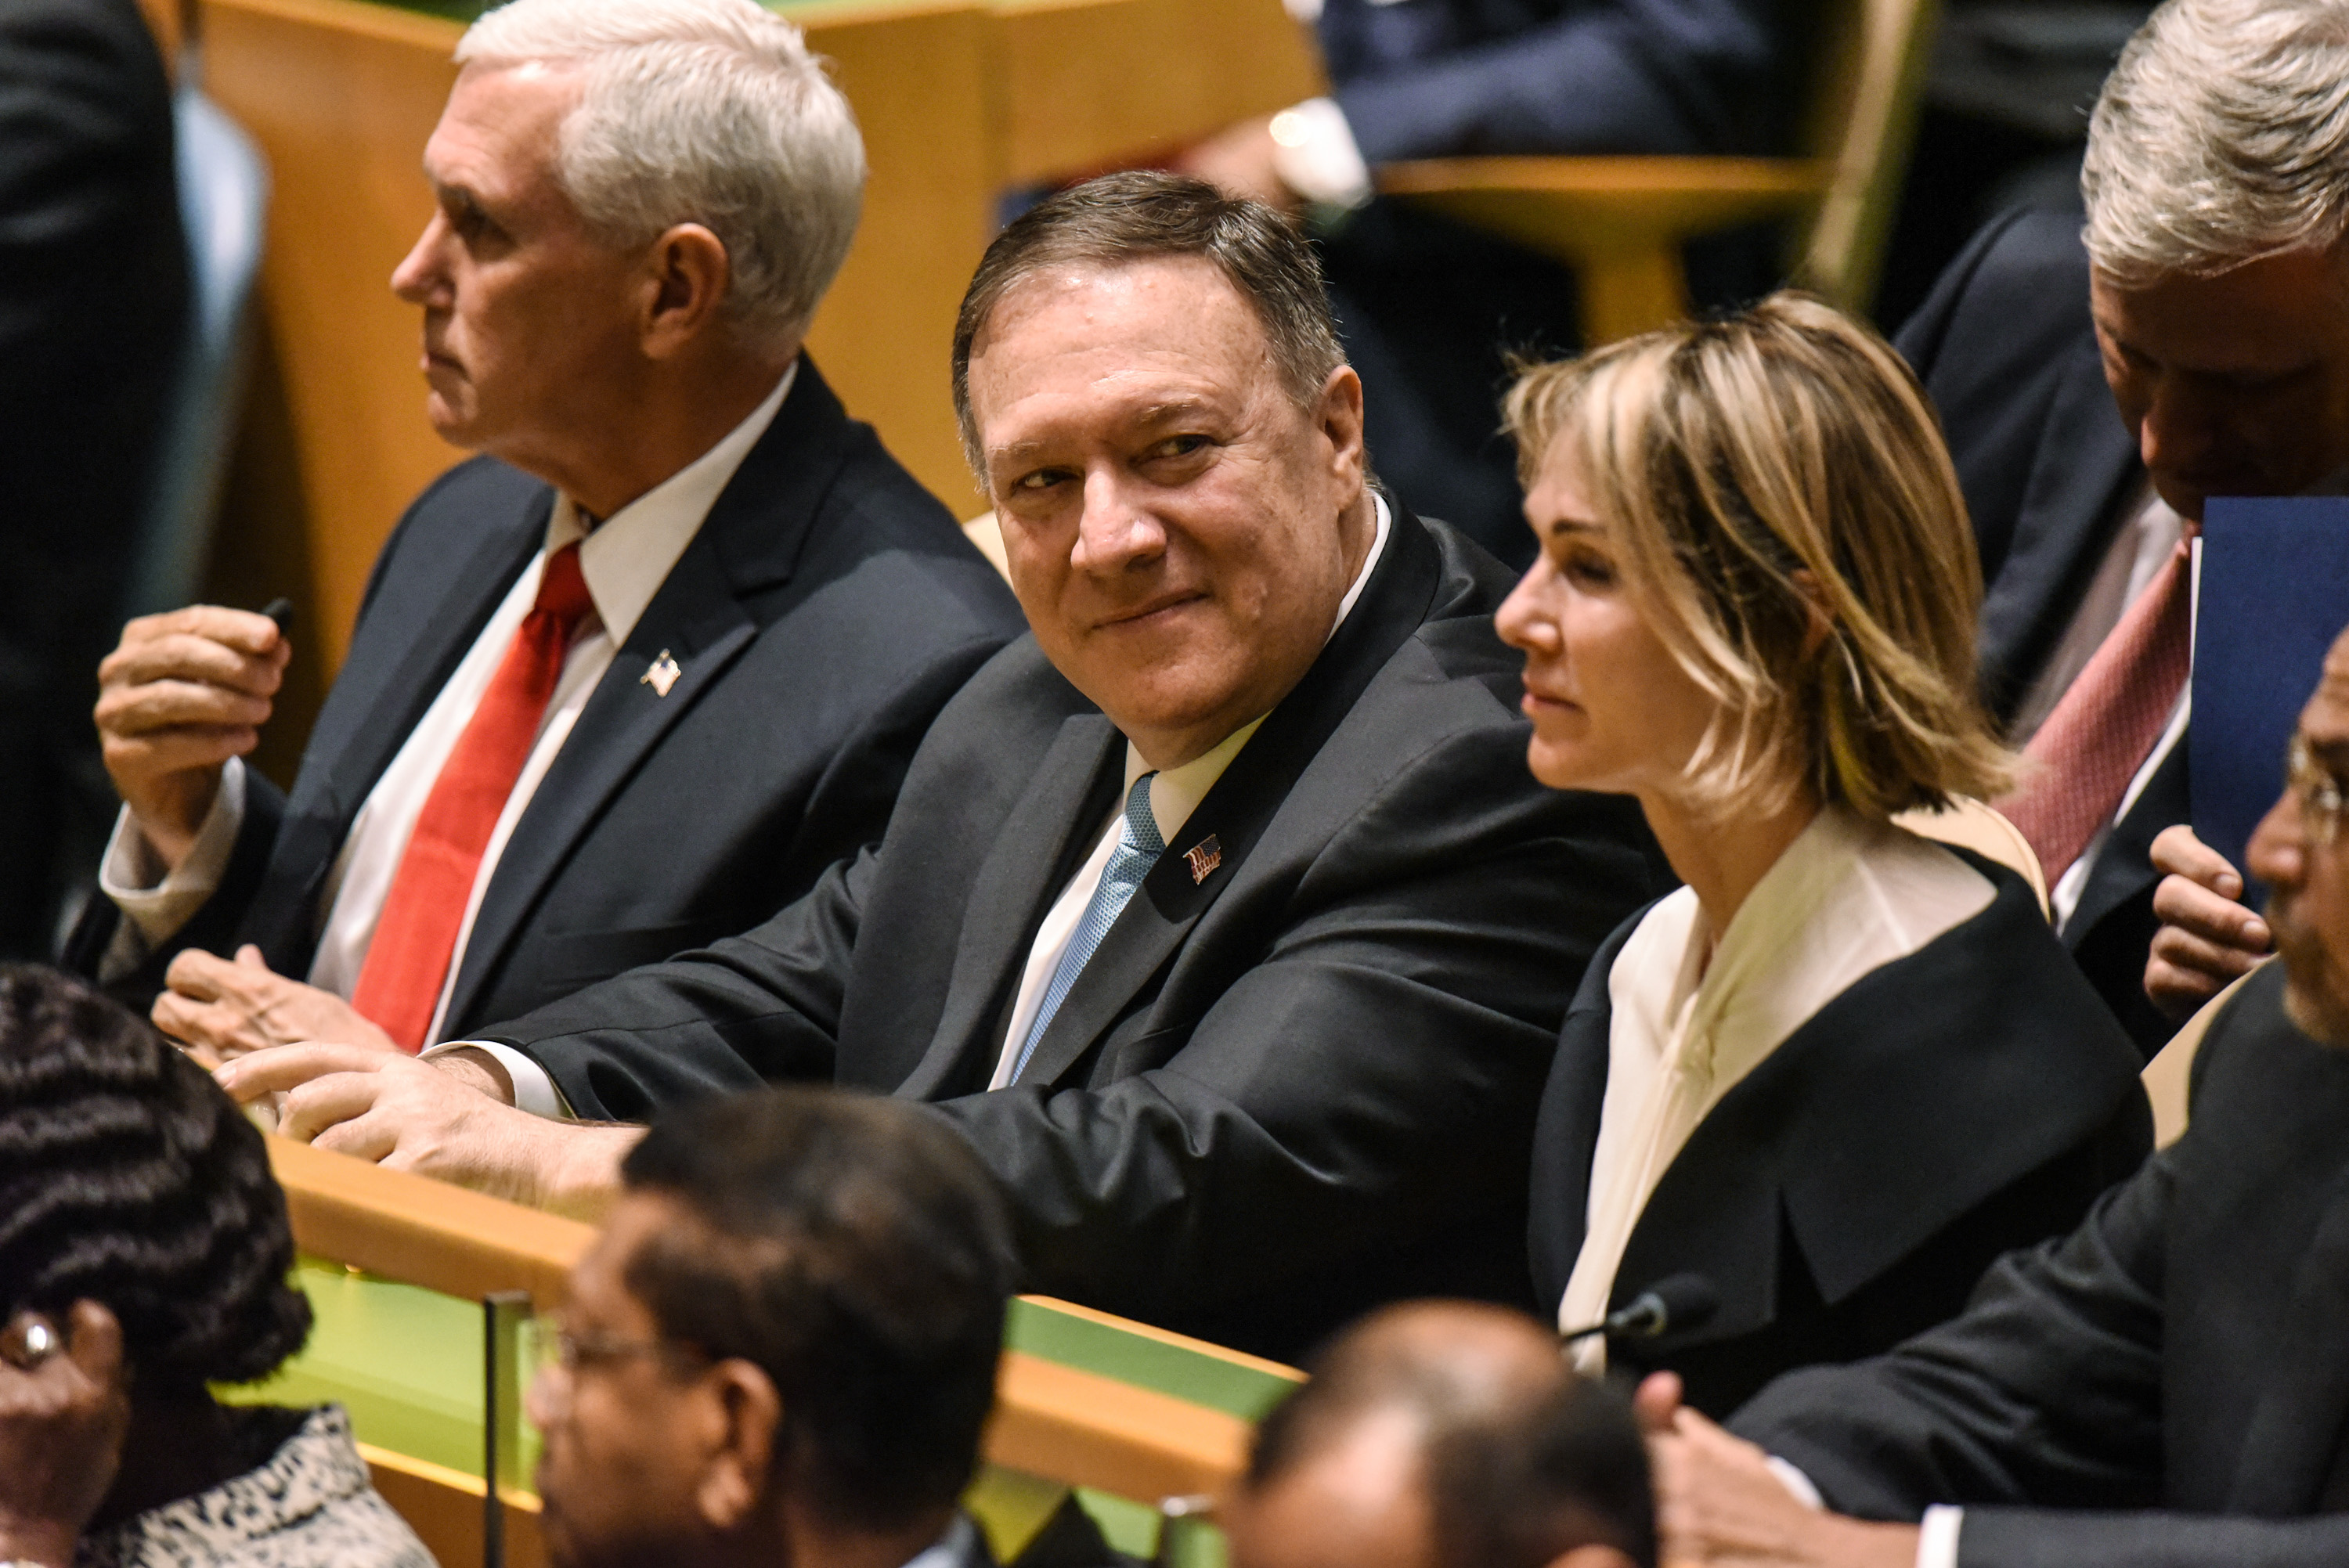 NEW YORK, NY - SEPTEMBER 24: U.S. Vice President Mike Pence (L), Secretary of State Mike Pompeo (C) and U.S. Ambassador to the U.N. Kelly Craft attend the United Nations (U.N.) General Assembly on September 24, 2019 in New York City. World leaders are gathered for the 74th session of the UN amid a warning by Secretary-General Antonio Guterres in his address yesterday of the looming risk of a world splitting between the two largest economies - the U.S. and China. (Photo by Stephanie Keith/Getty Images)